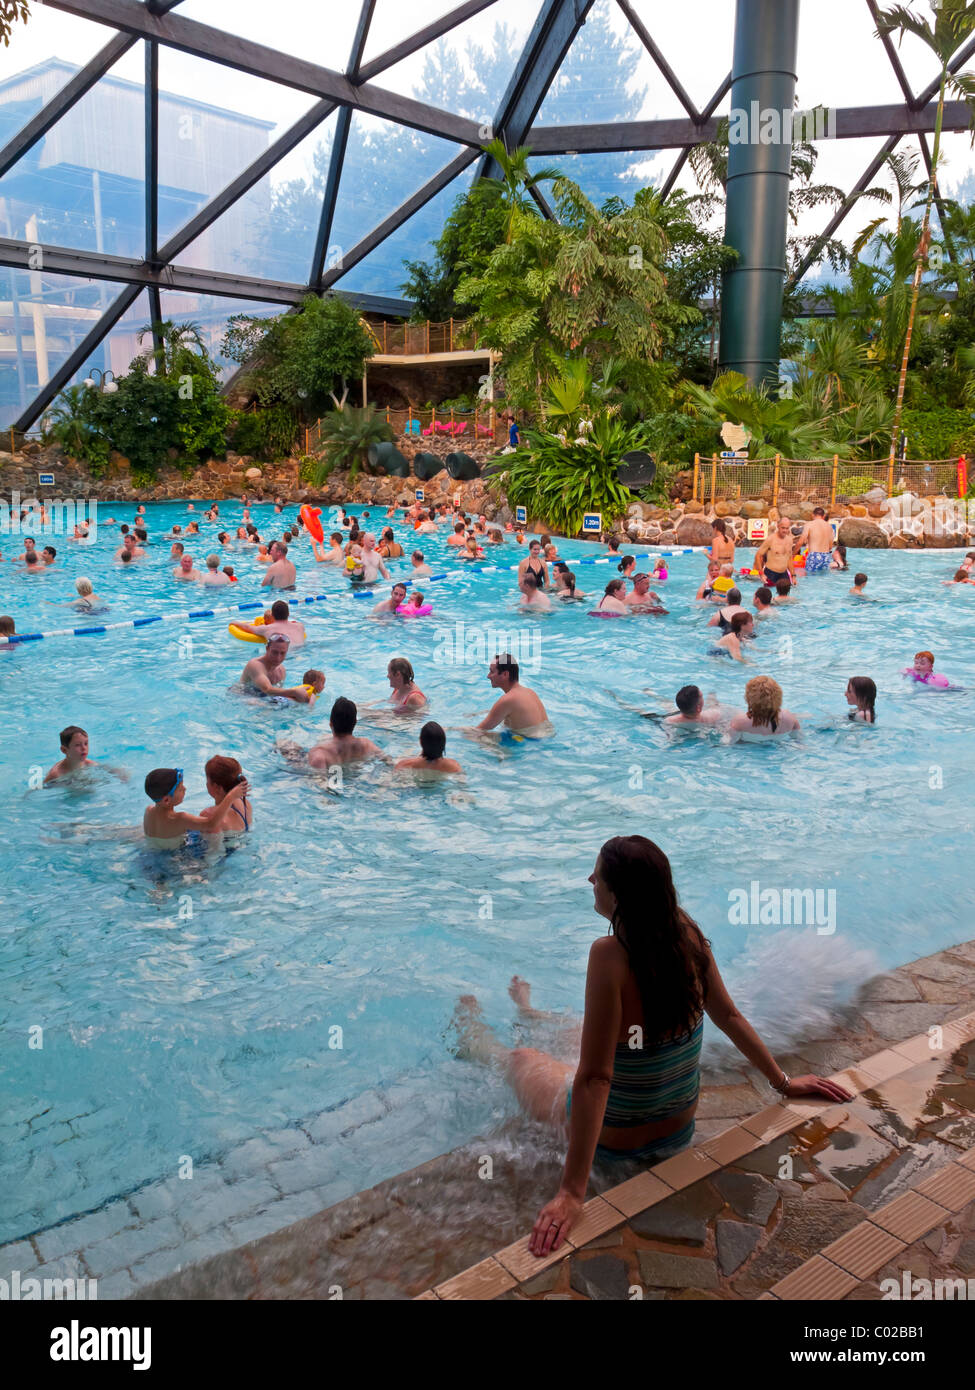 People swimming in the large domed pool at Center Parcs Sherwood Forest near Rufford Nottinghamshire England UK opened in 1987 Stock Photo